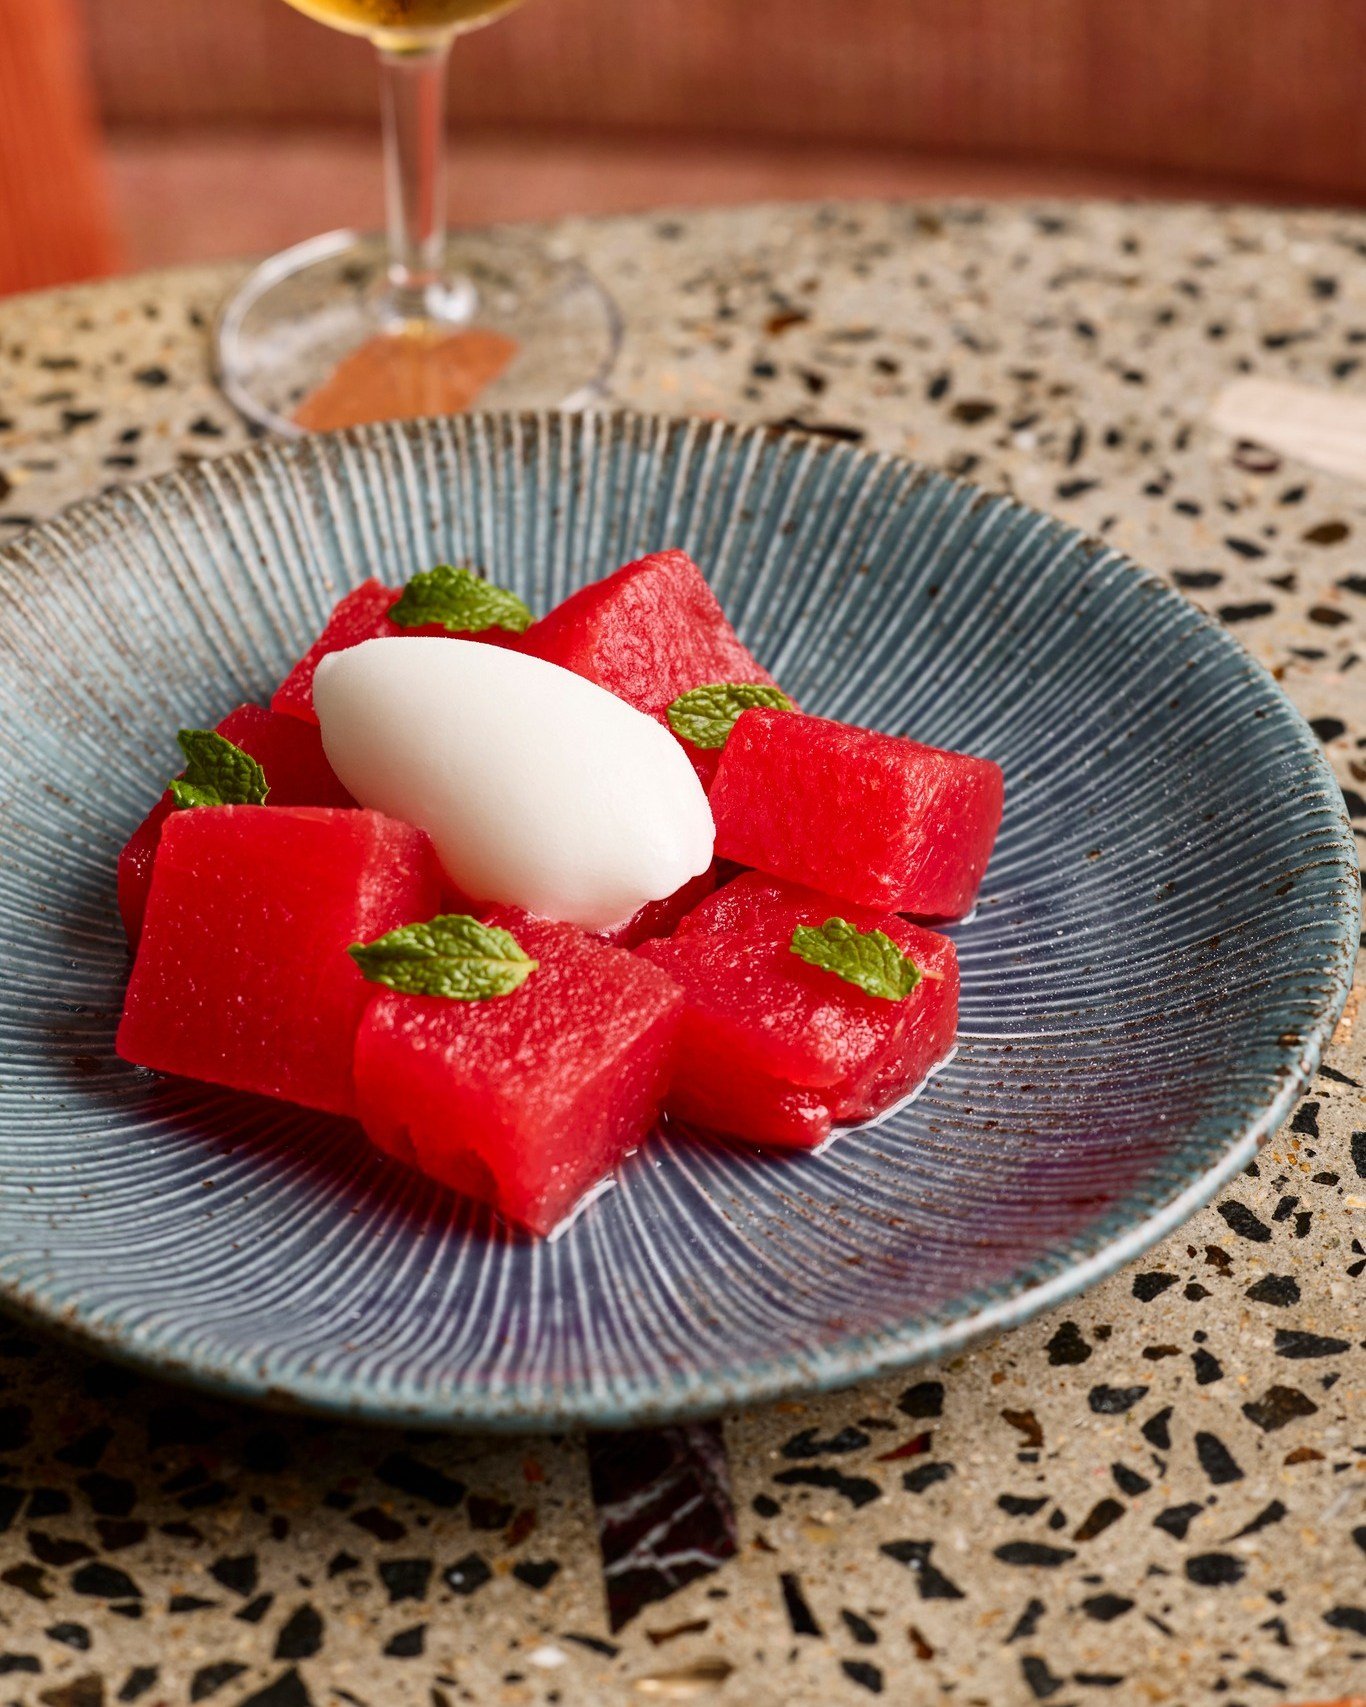 THe most refreshing dessert ~ compressed watermelon with lemon sorbet

www.yamasrestaurant.com.au/bookings to reserve your table or call us on (07) 2101 5000
45 Mollison St, West End QLD 4101

#yamas #westendbrisbane #greekfood